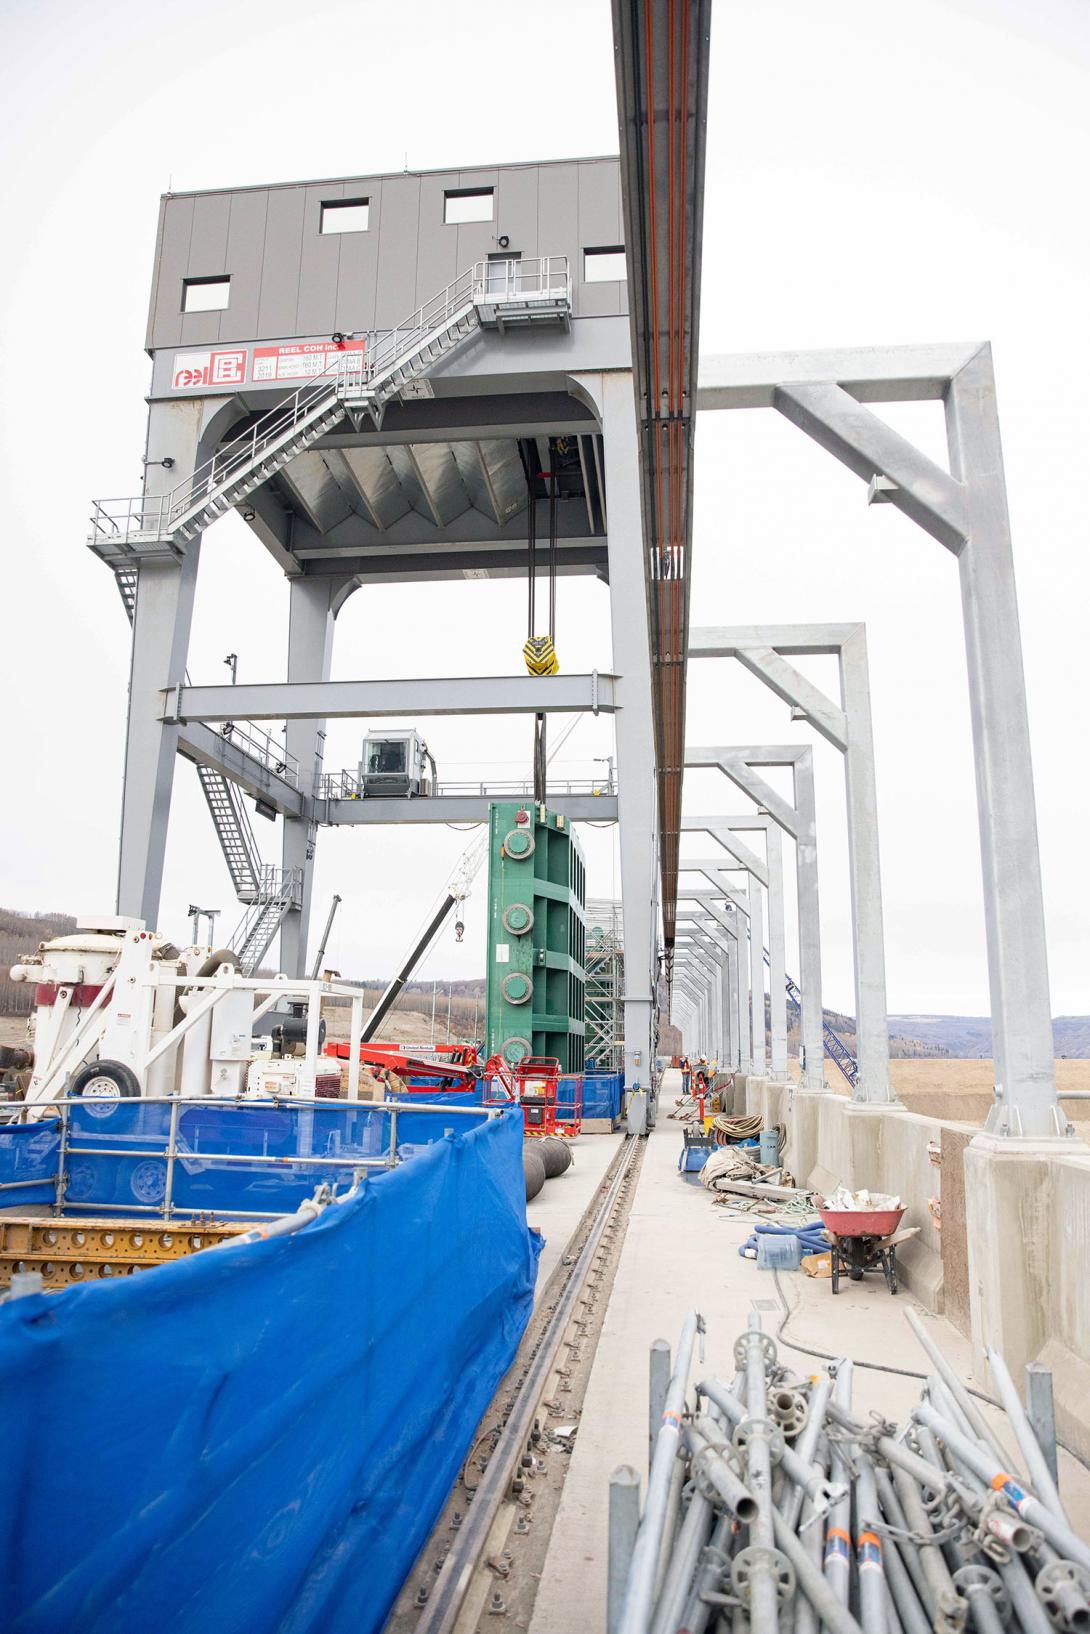 The gantry crane on the intake deck has a lifting capacity of 160 tonnes. It moves on rails and will lower and raise the intake gates, such as the green gate suspended from the crane.